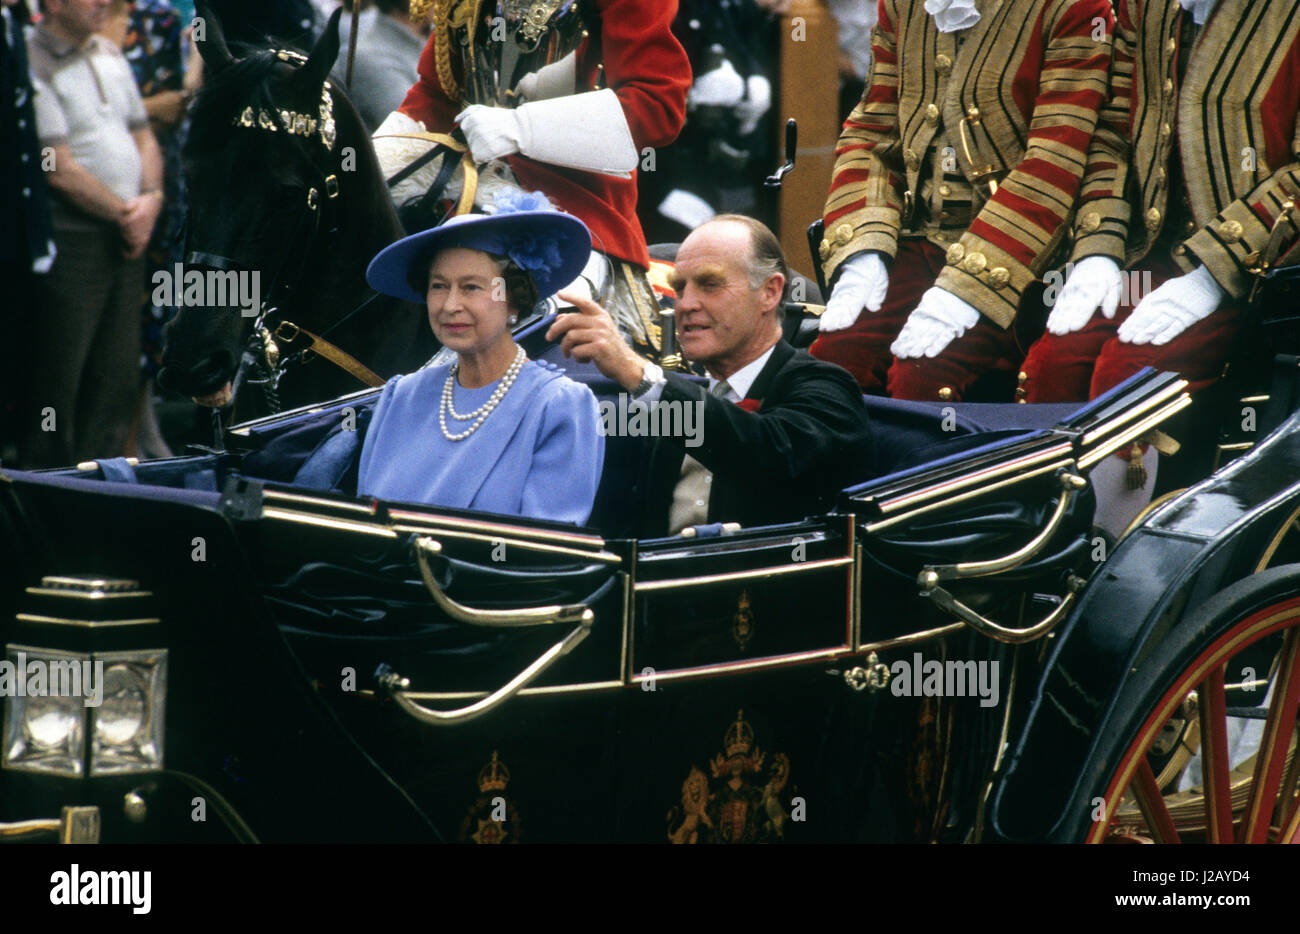 Her Majesty the Queen Elizabeth 11 with Major Ronald Ferguson returning to Buckingham Palace by coach following the wedding of Prince Andrew and Sarah Ferguson 1986 Stock Photo